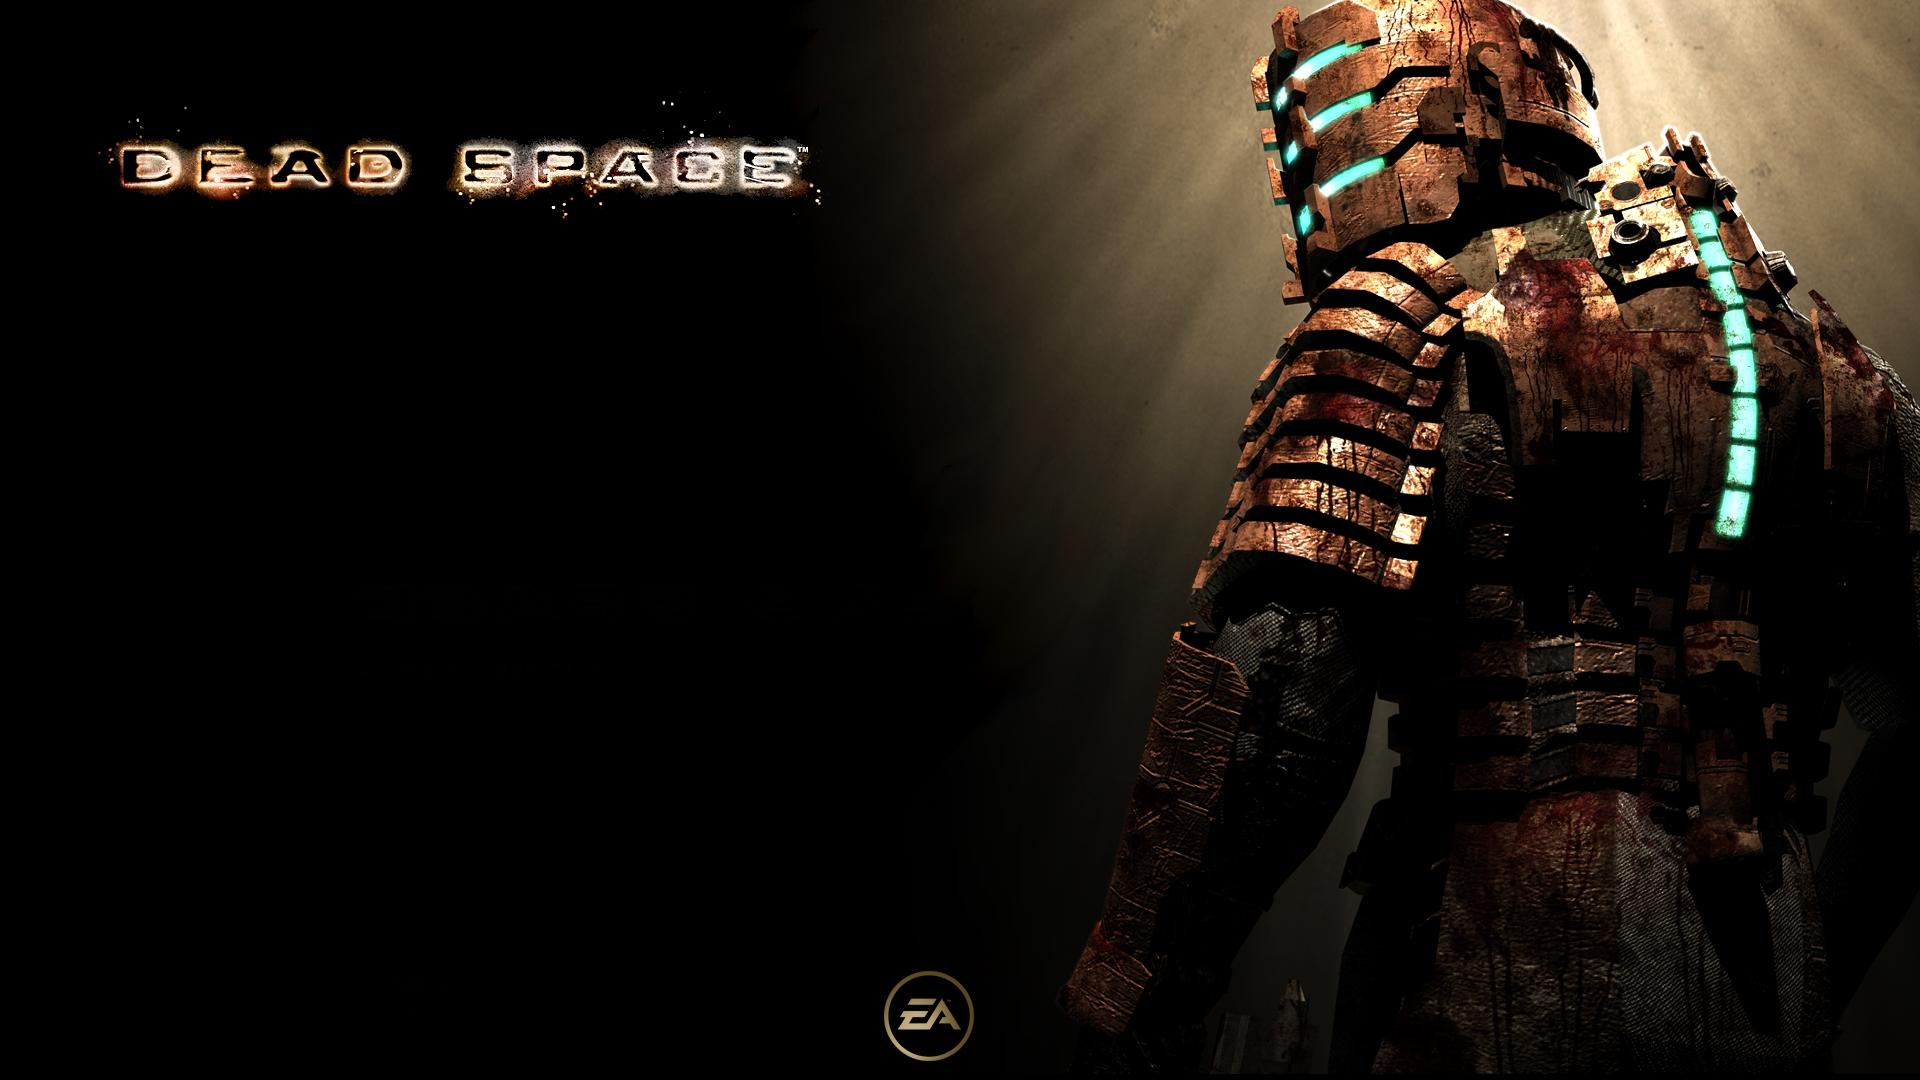 Dead space 5